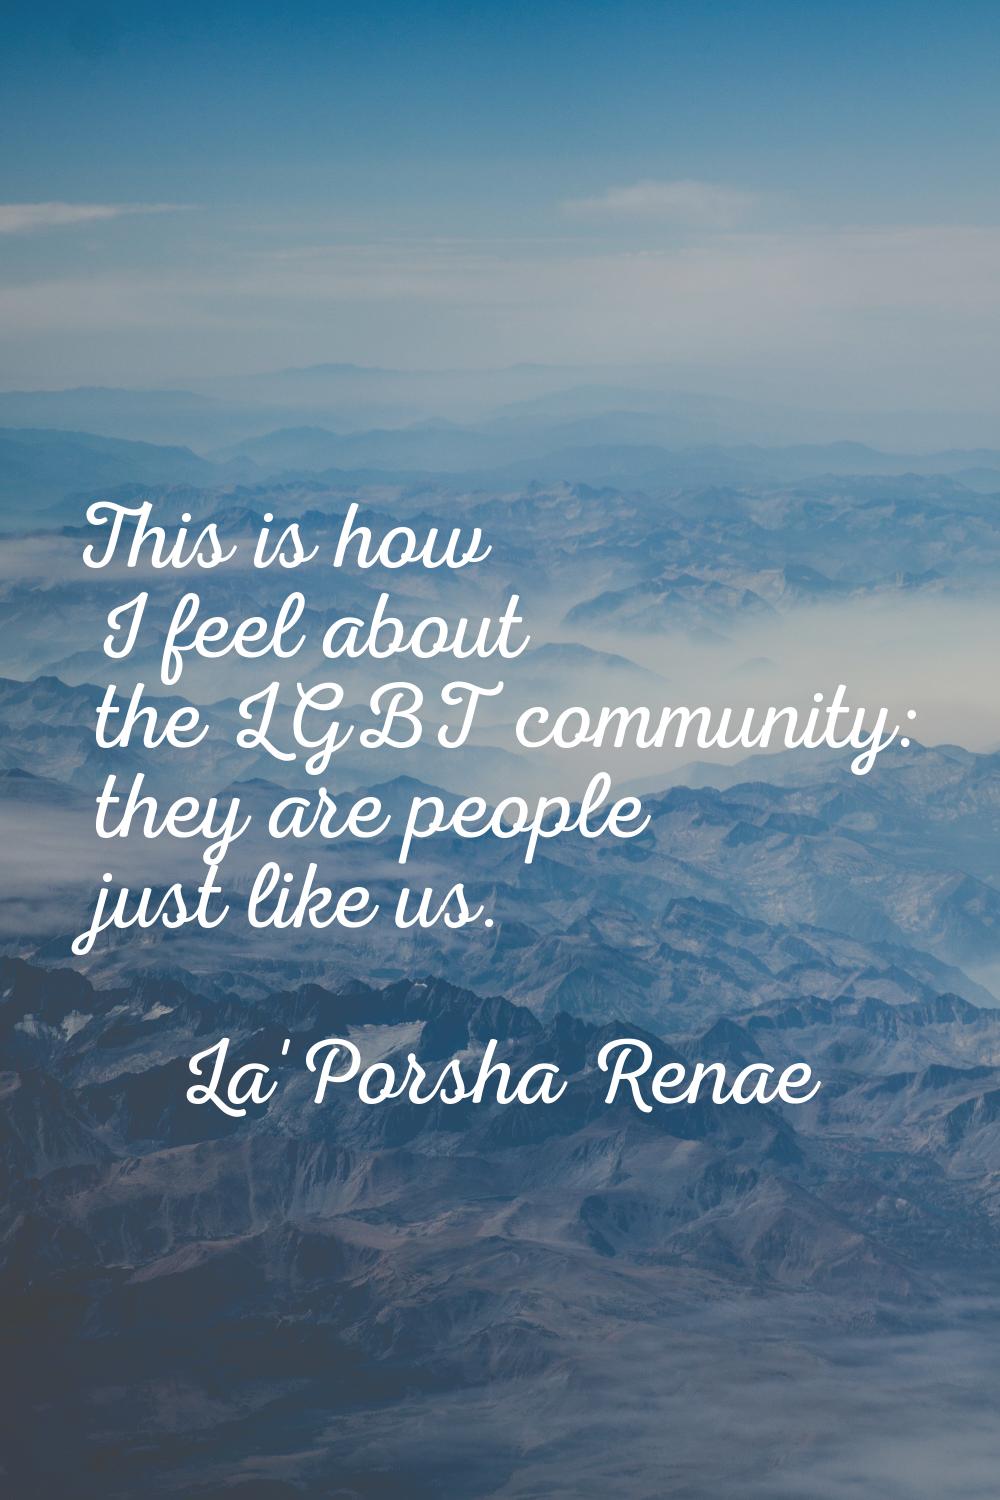 This is how I feel about the LGBT community: they are people just like us.